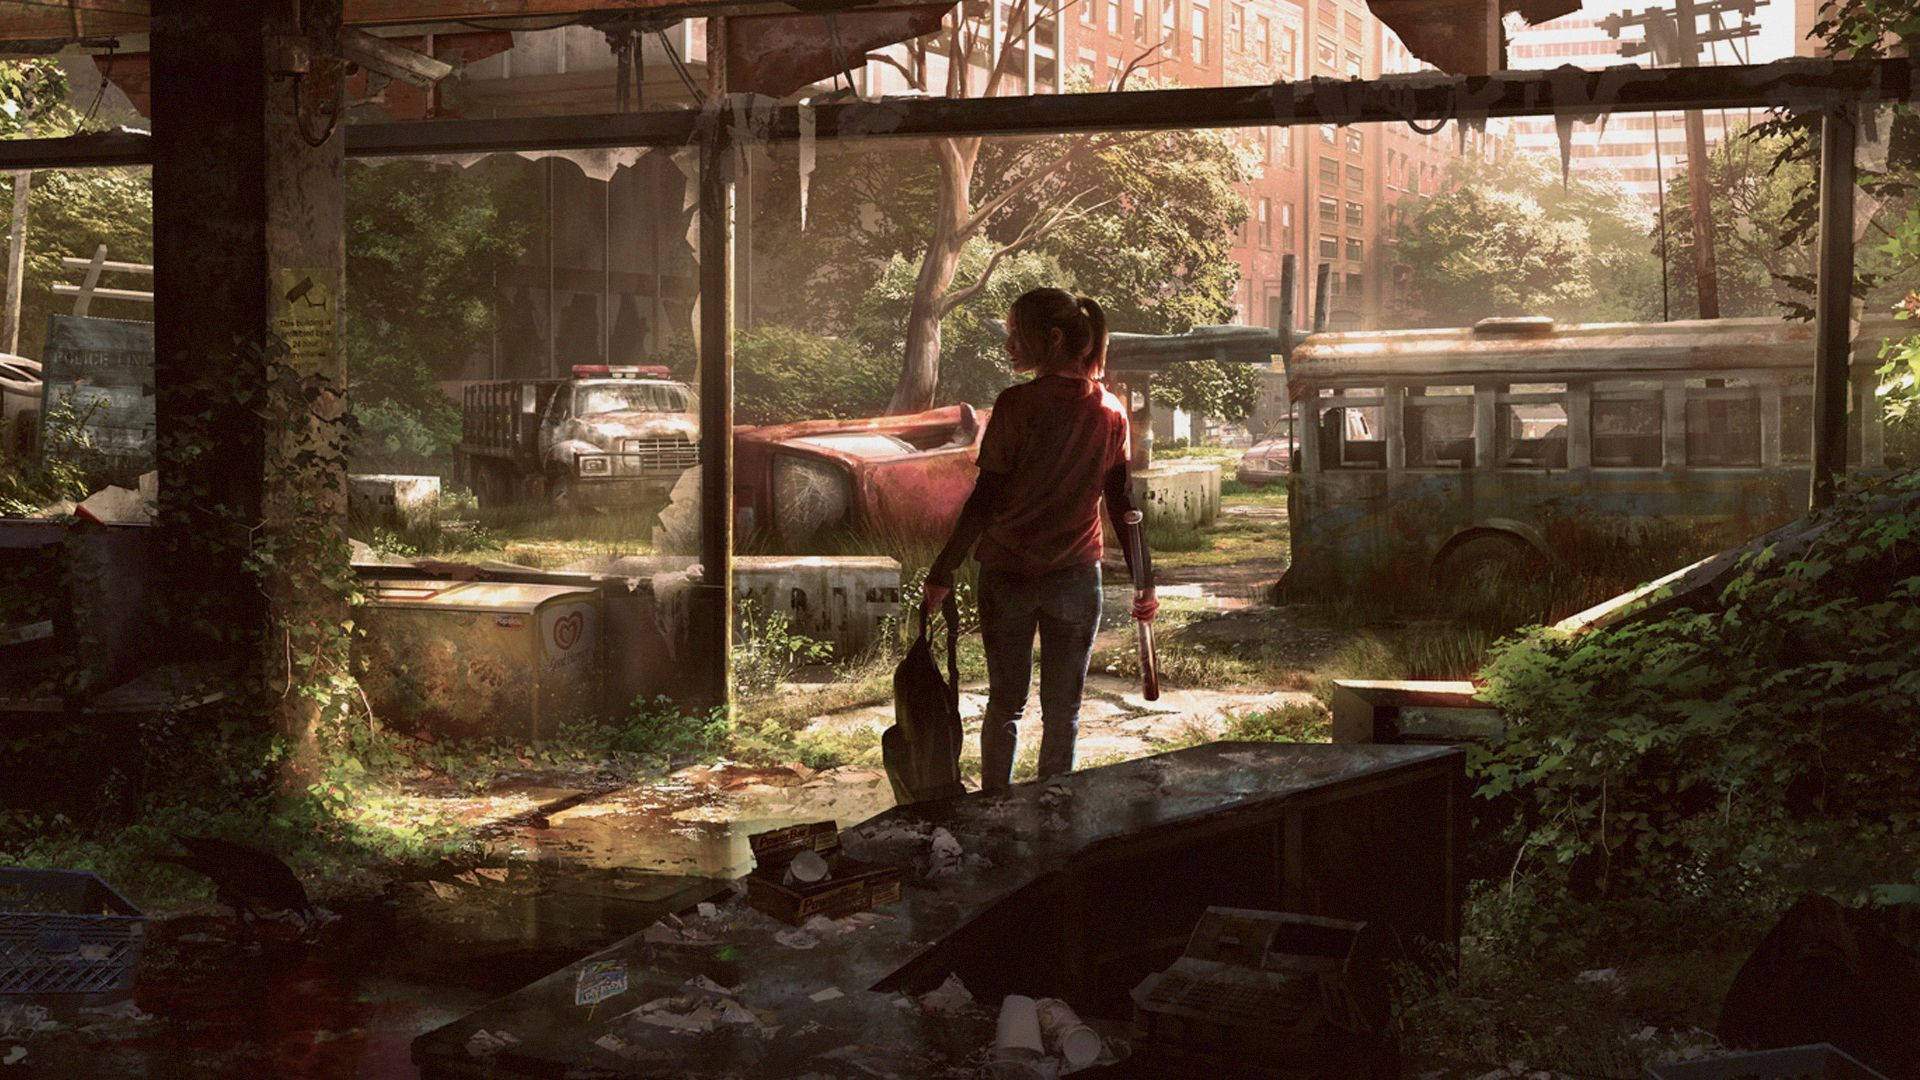 Joining Forces To Fight The Dangerous Infected In The Post-apocalyptic World Of The Last Of Us. Background